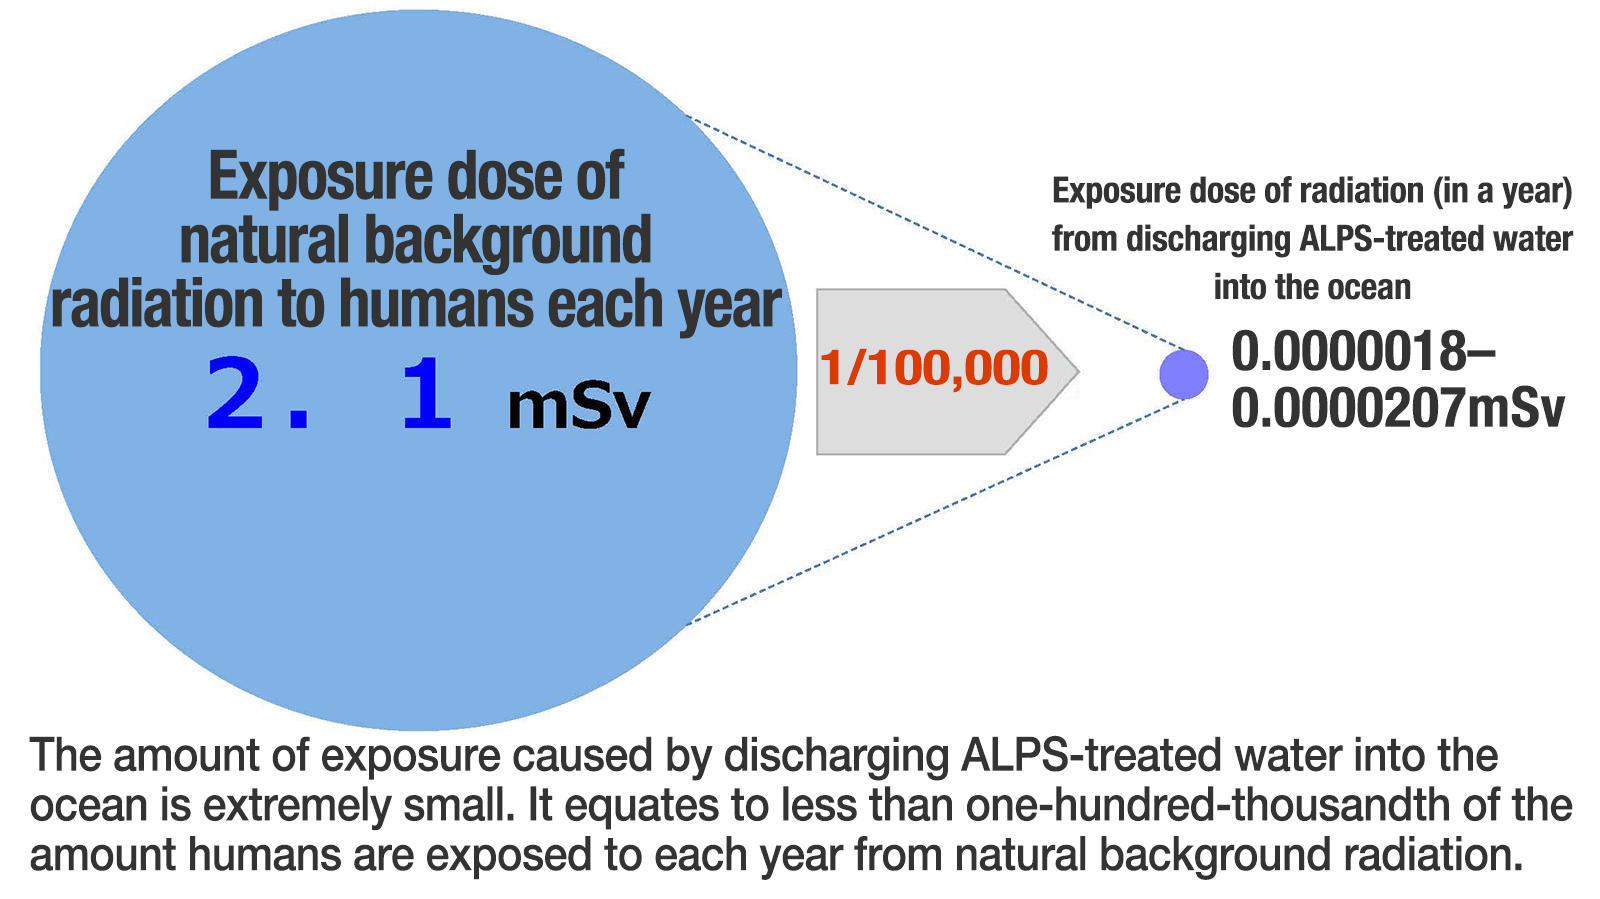 The amount of exposure caused by discharging ALPS-treated water into the ocean is extremely small. It equates to less than one-hundred-thousandth of the amount humans are exposed to each year from natural background radiation.